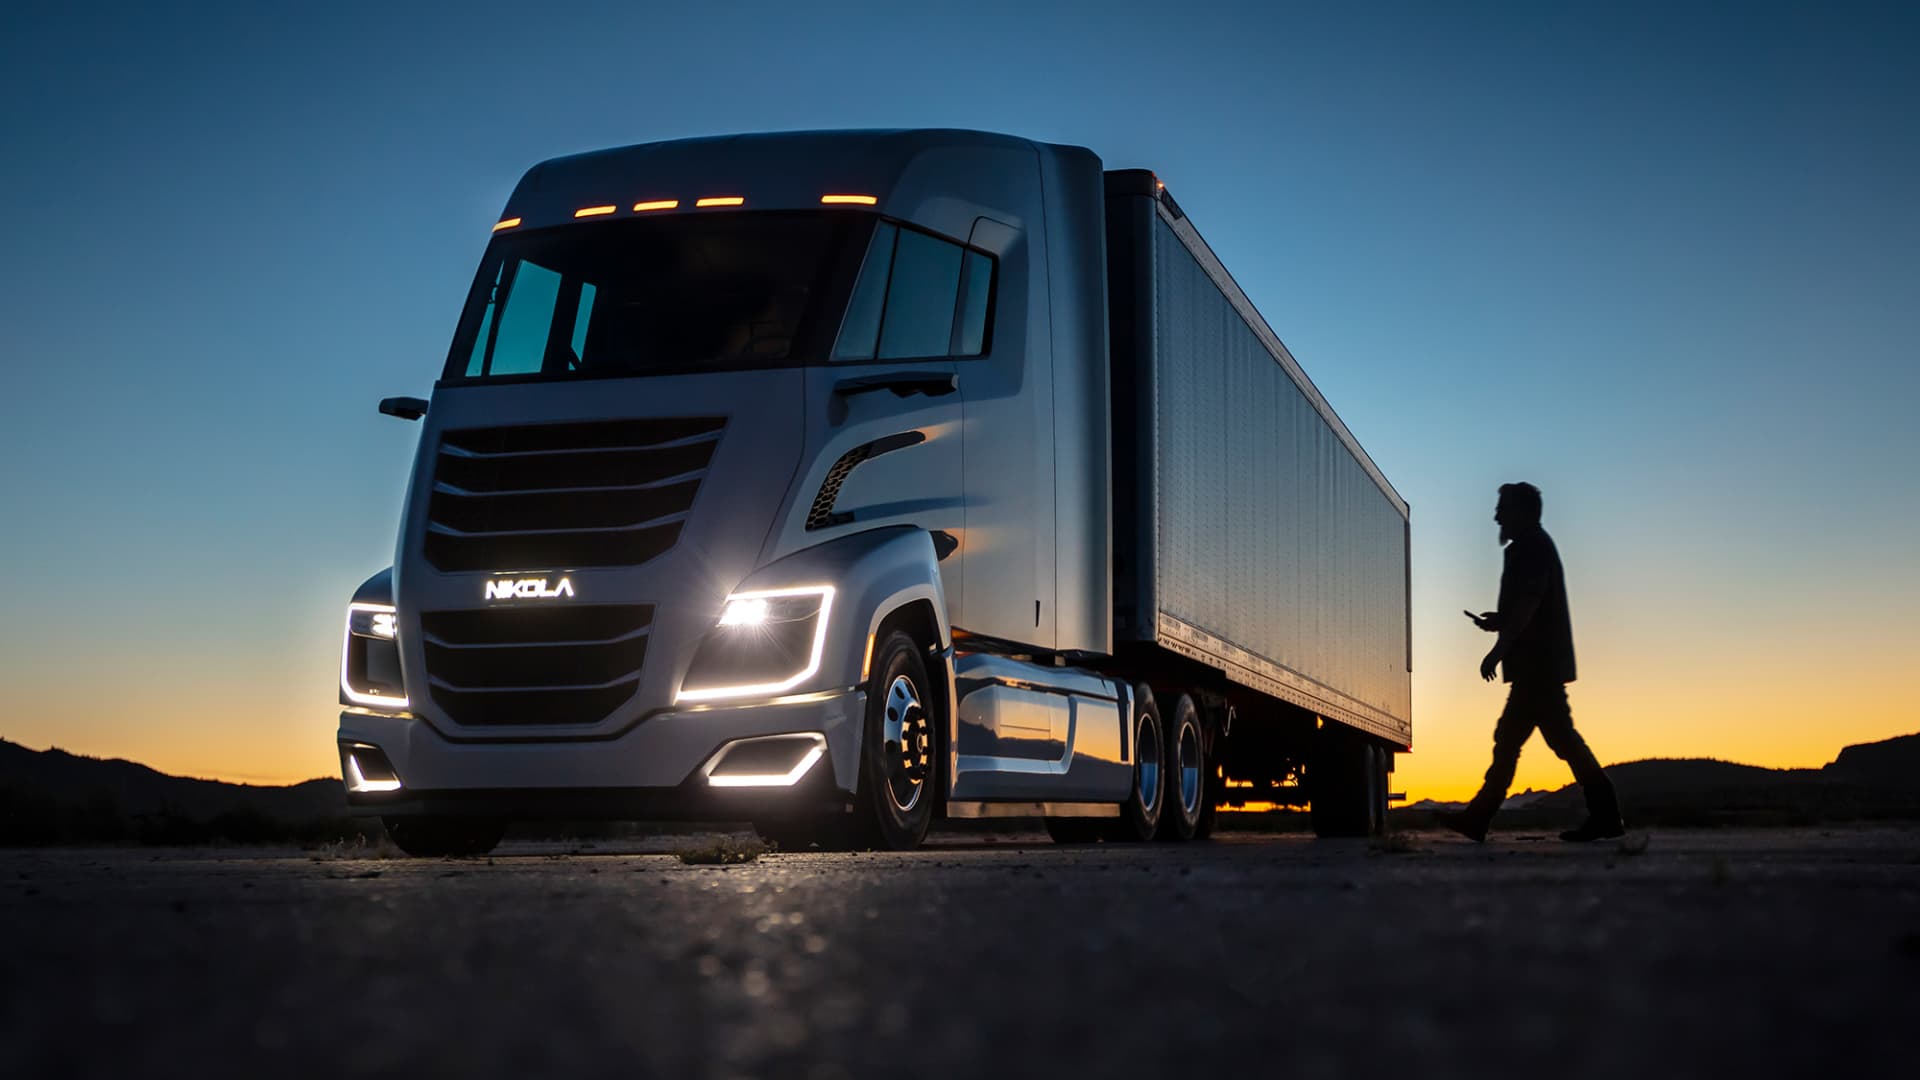 Nikola will offer a hands-free highway driving system for its trucks starting next year Auto Recent